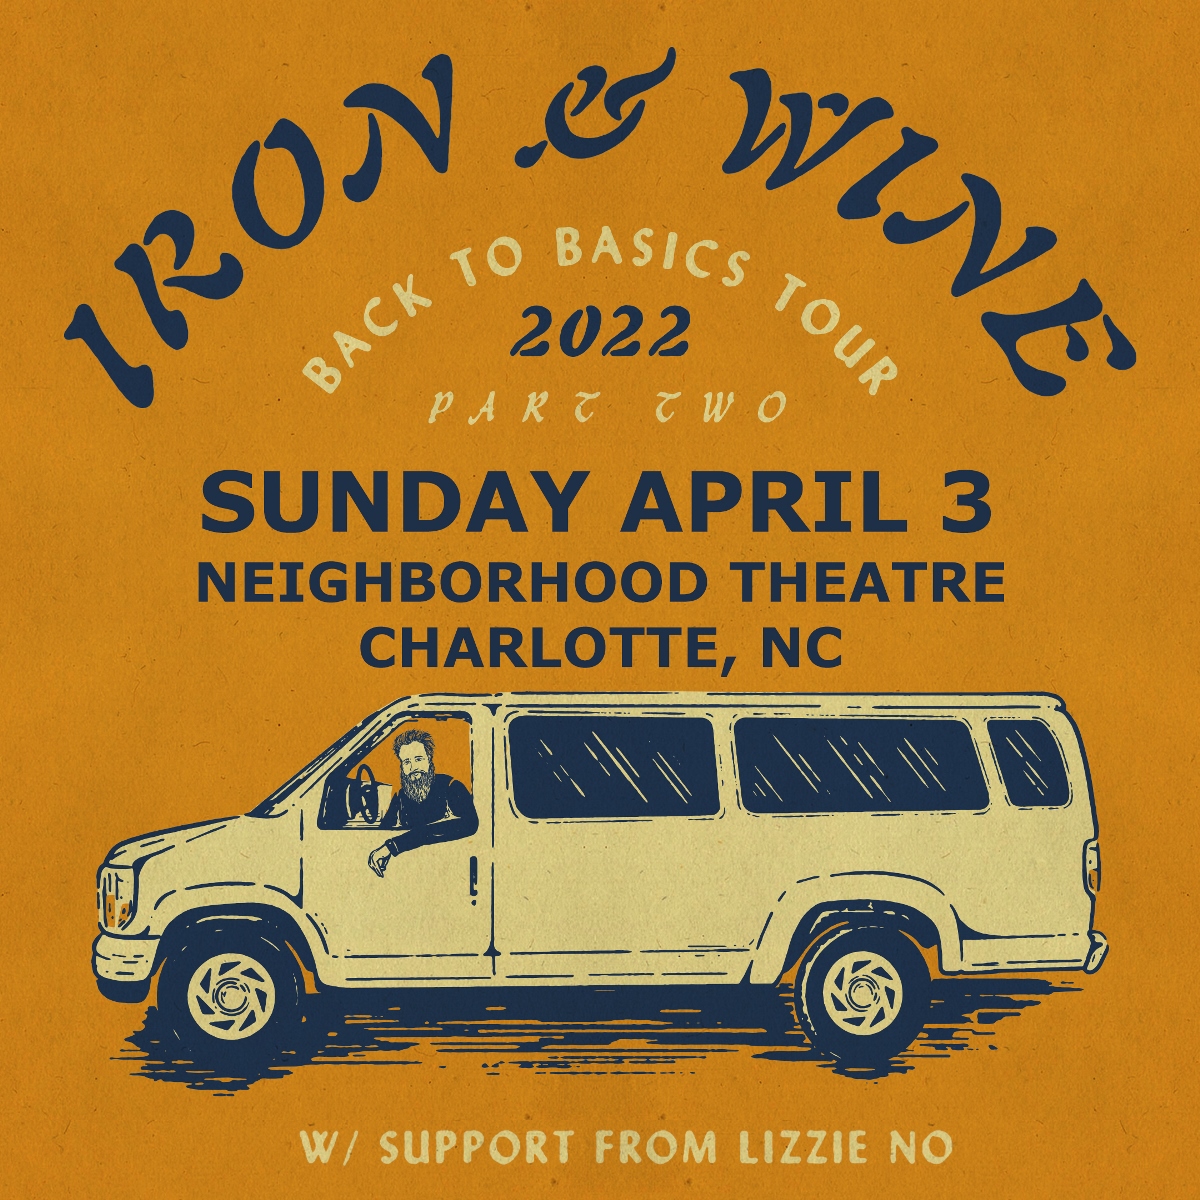 IRON & WINE – Back To Basics Tour 2022 with Lizzie No